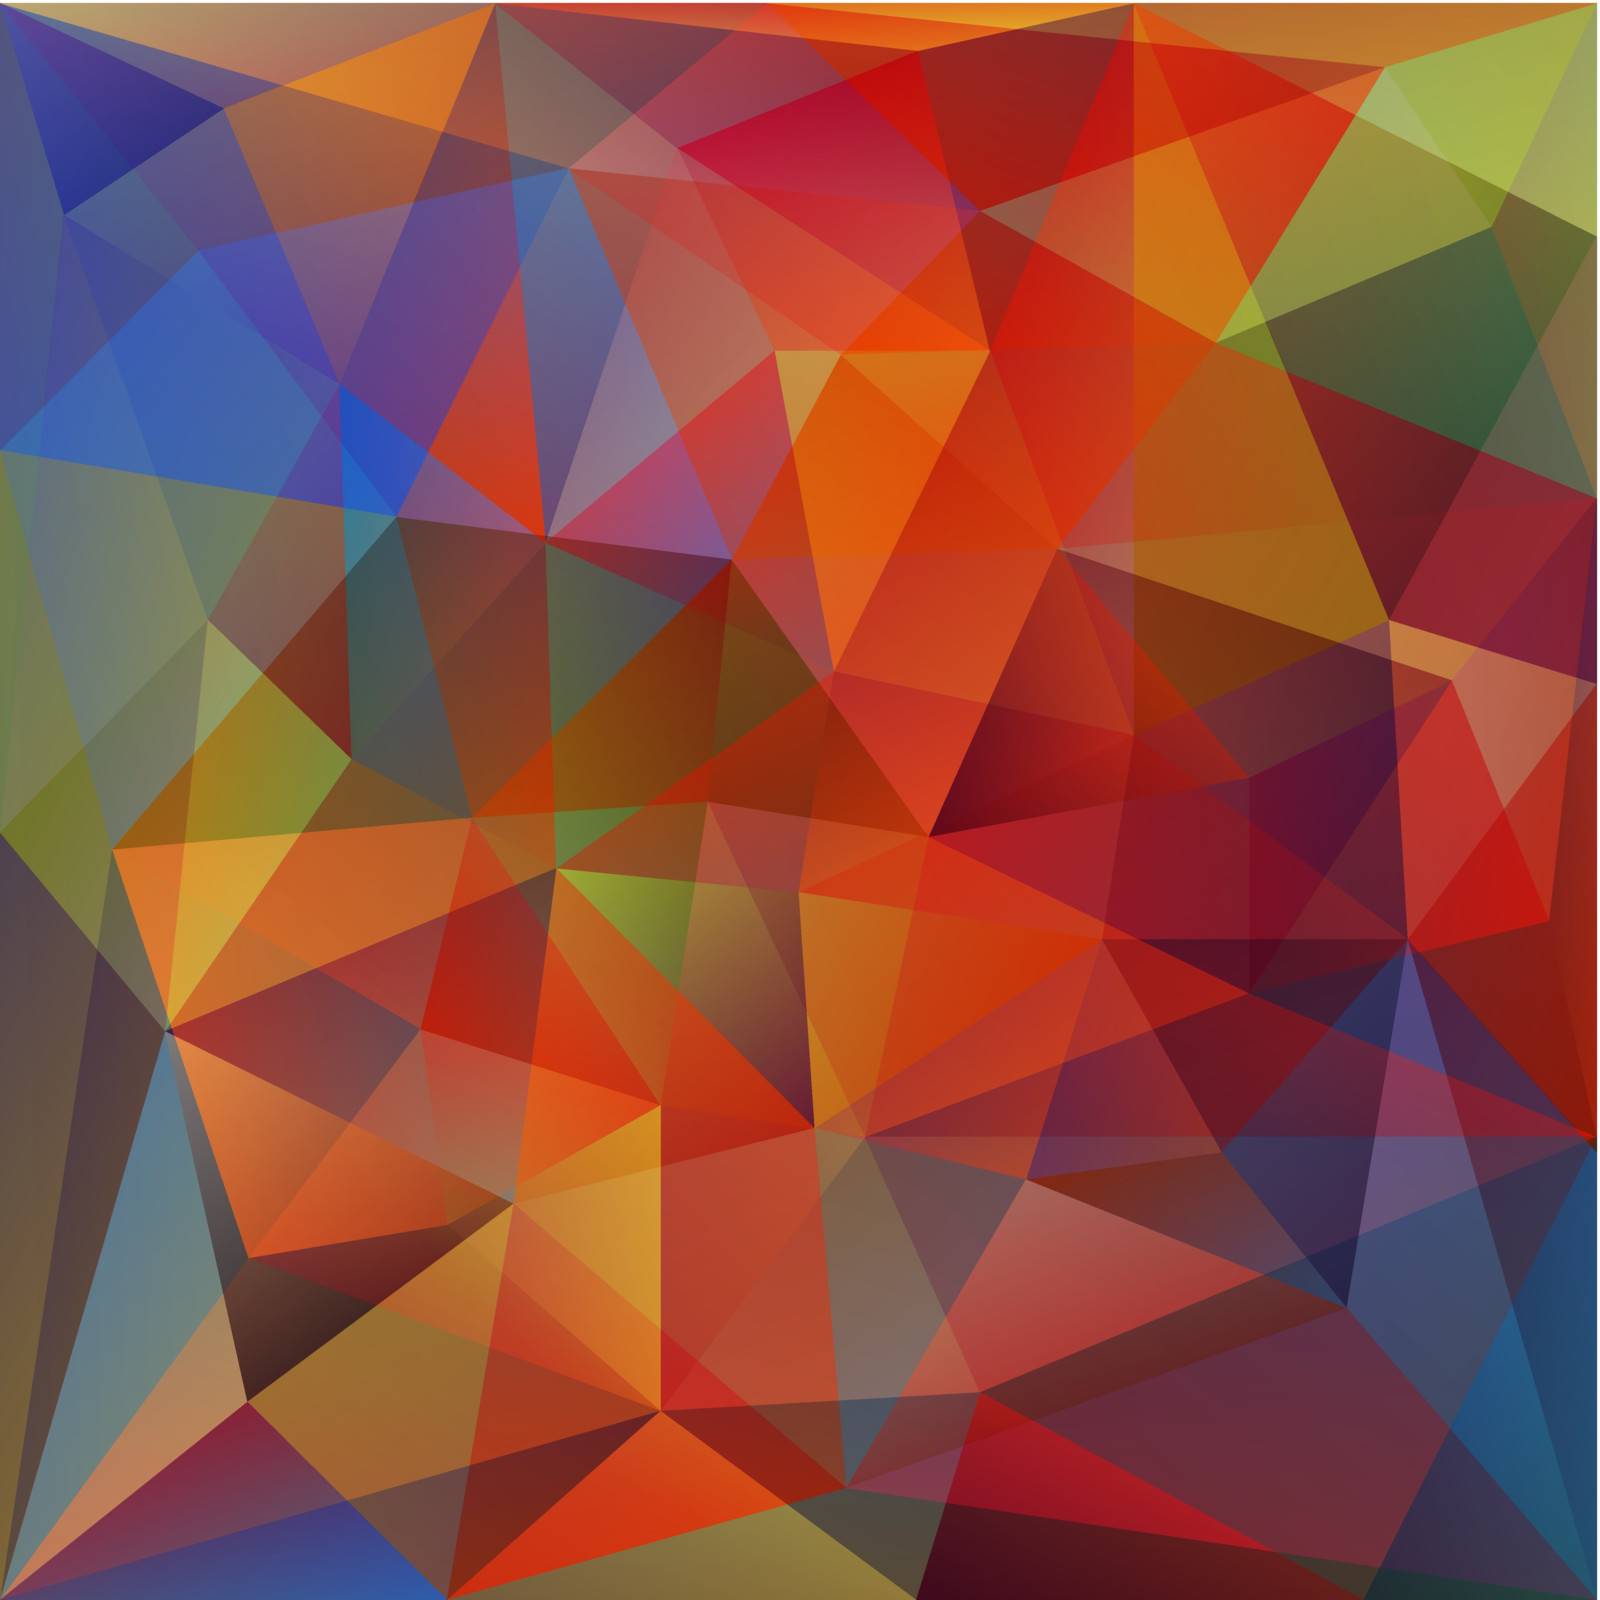 Abstract Triangle Geometrical Multicolored Background, Vector Illustration EPS10, Contains Transparent Objects and Gradient